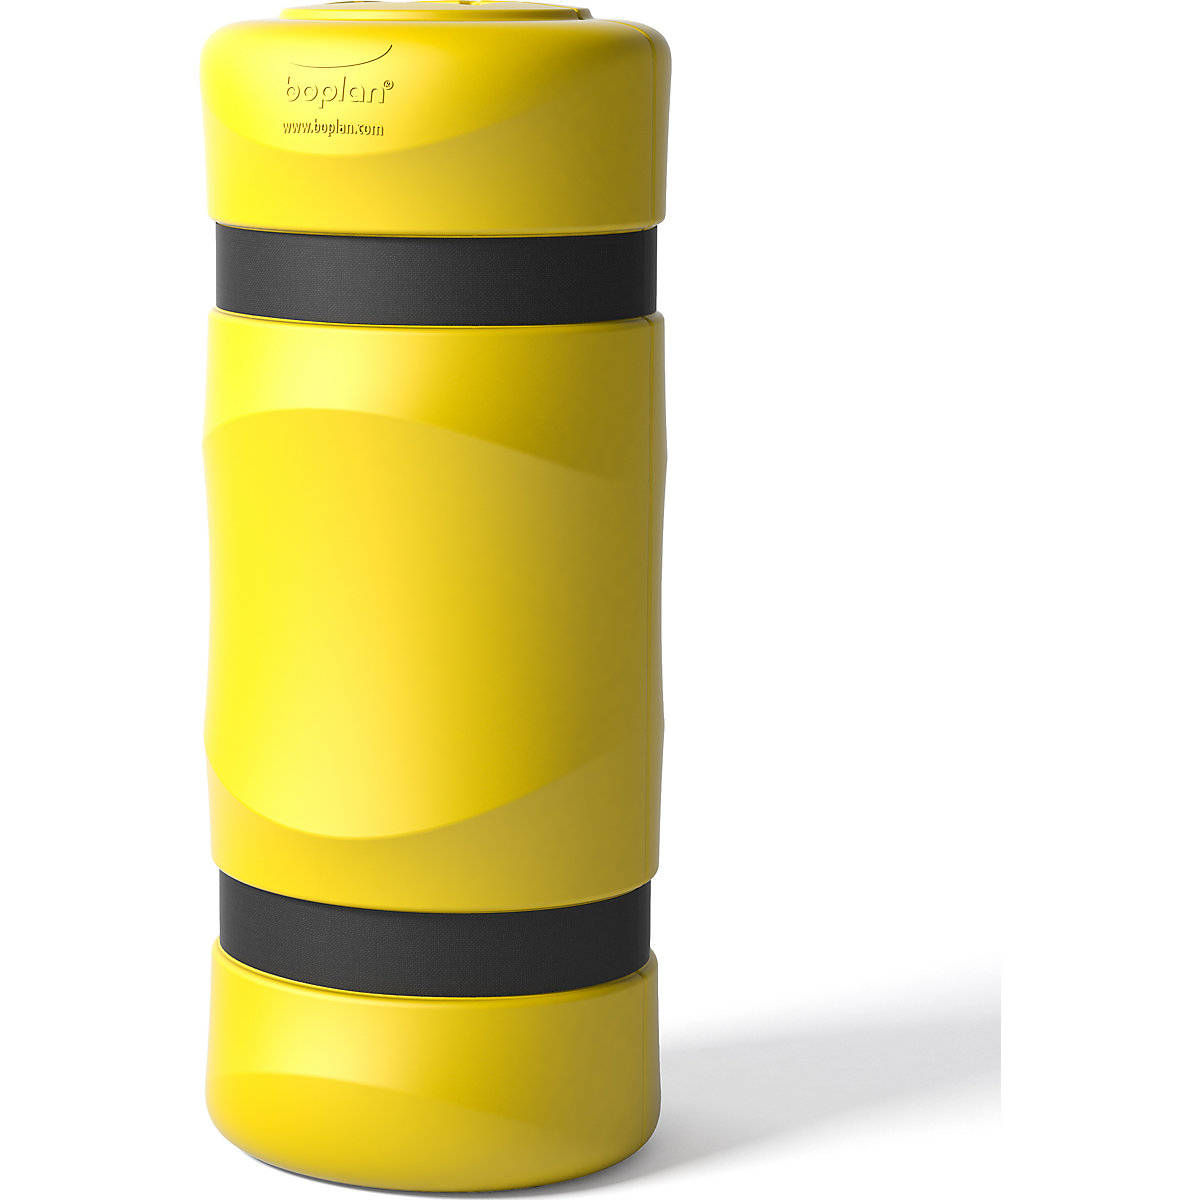 KP Protector column protection, height 1100 mm, WxD 150 x 150 mm-5